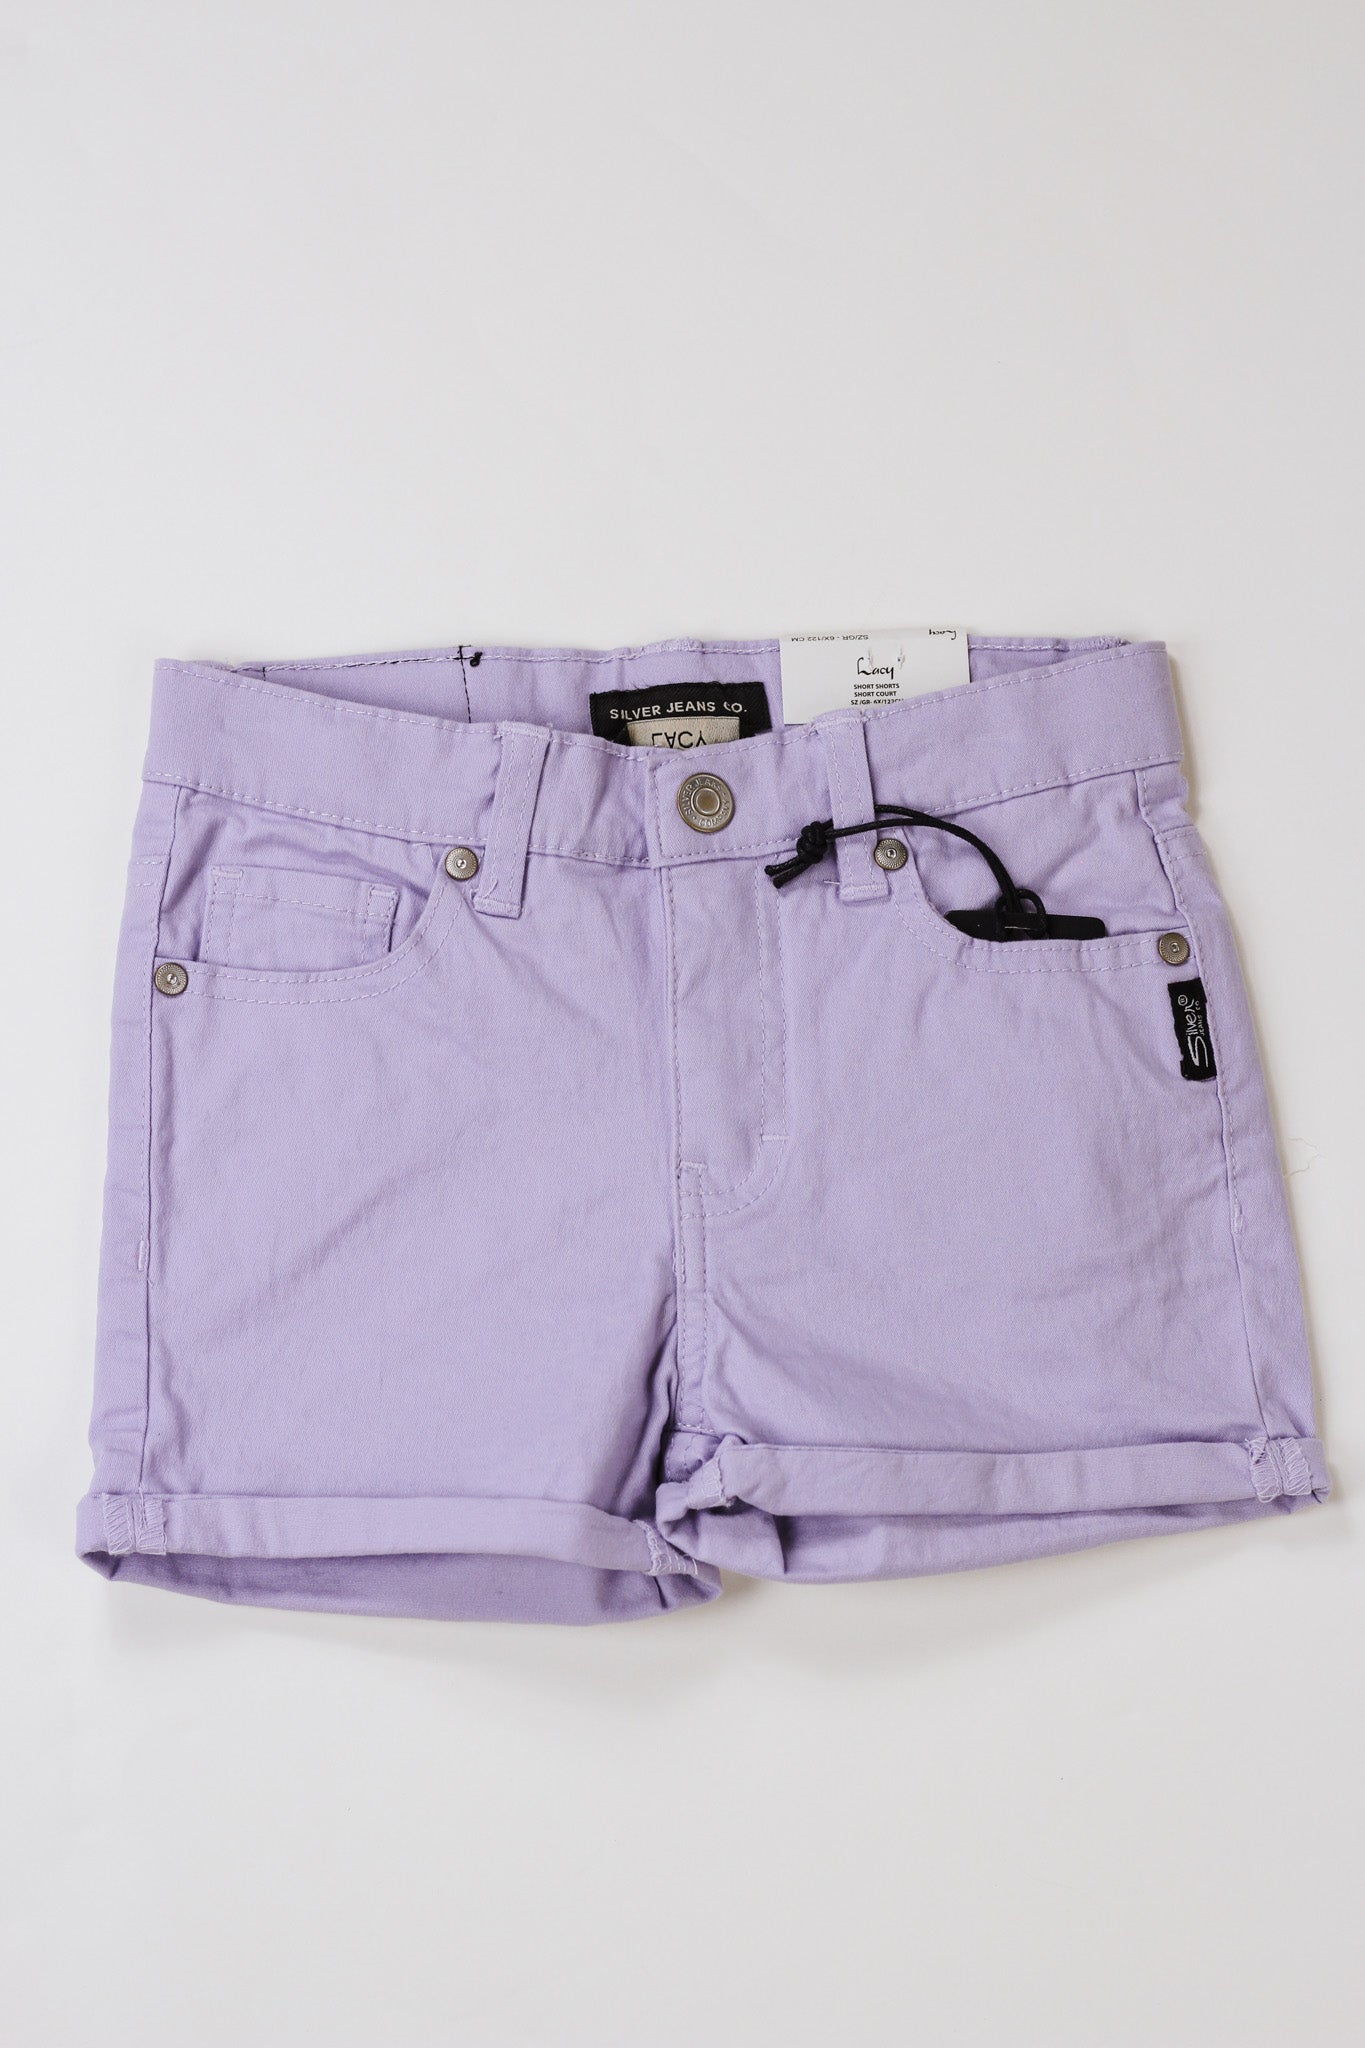 Lavender Girls Shorts By Silver Jean Co